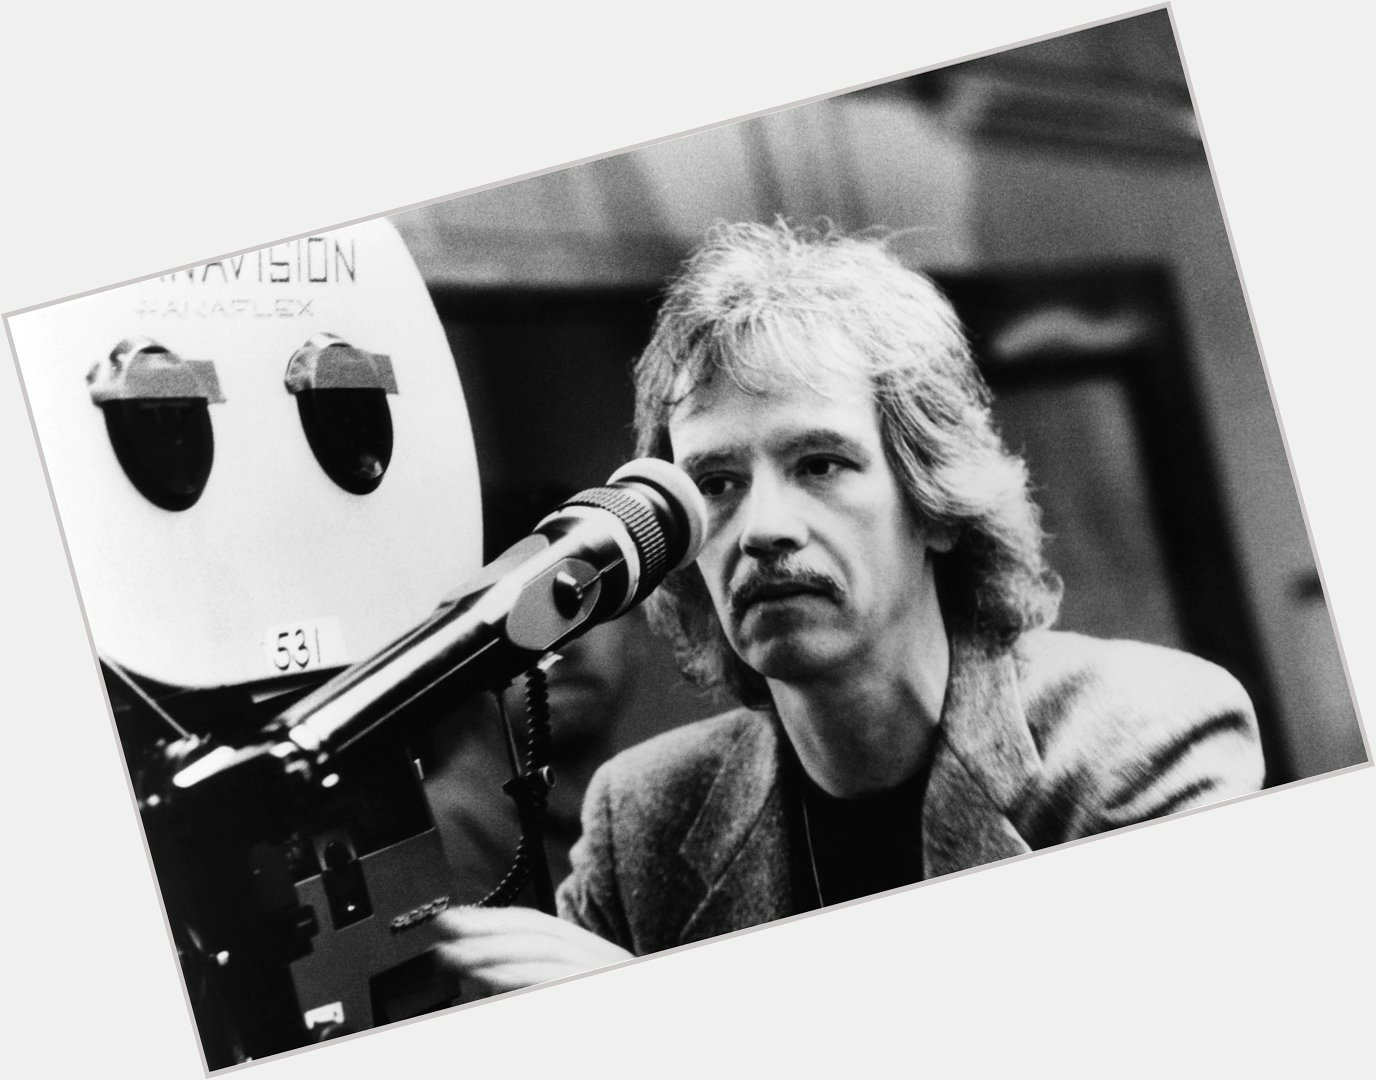 Happy 75th Birthday to one of my great movie making influences, the legendary John Carpenter. 